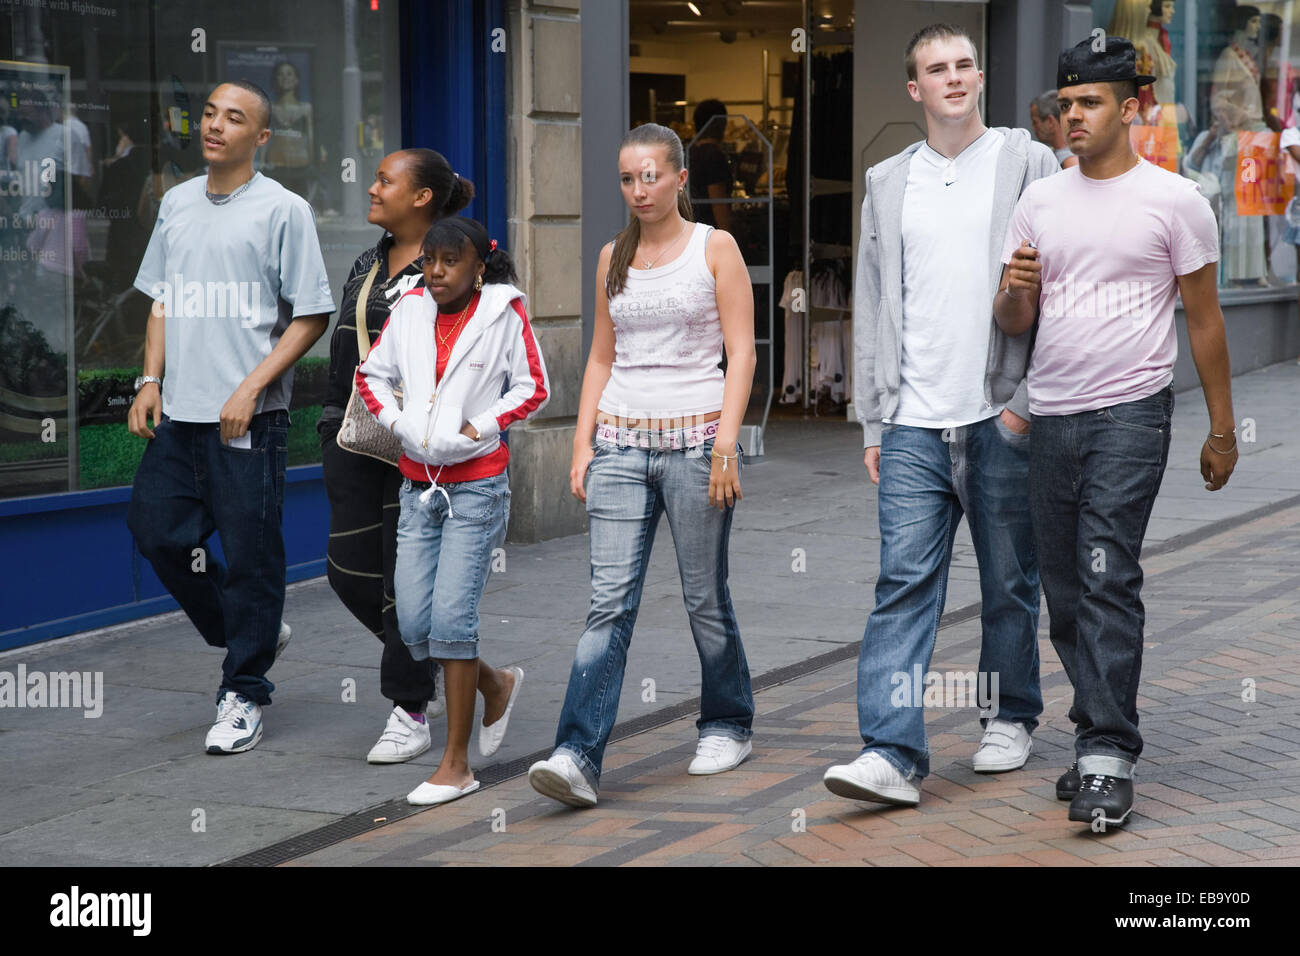 Multiracial group of teenagers walking down a street together, Stock Photo